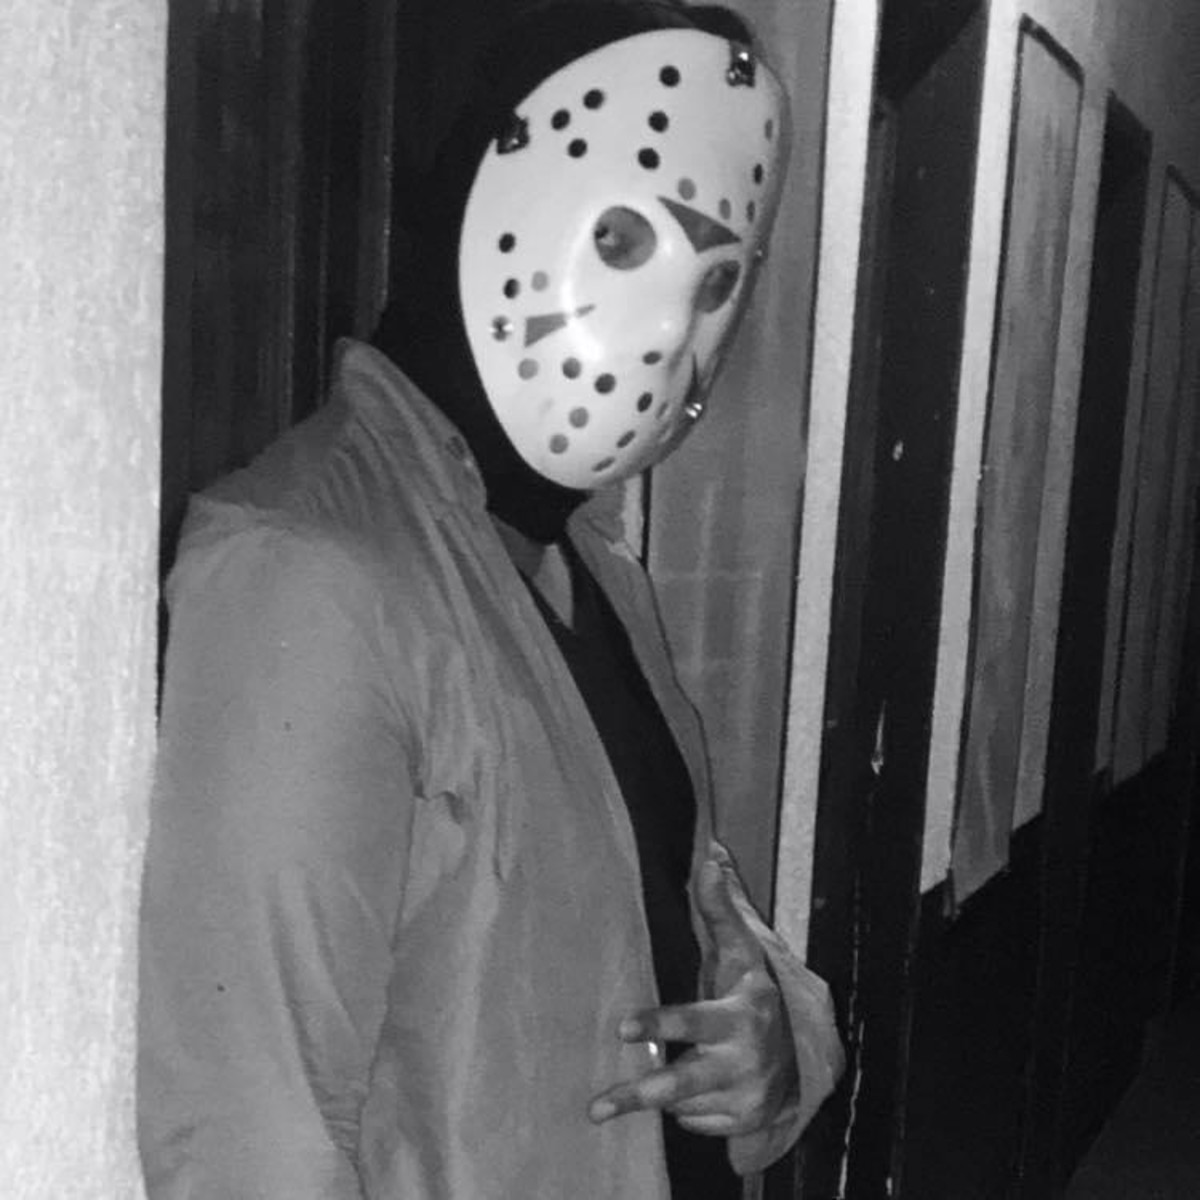 Me as Jason Voorhees in a low budget.